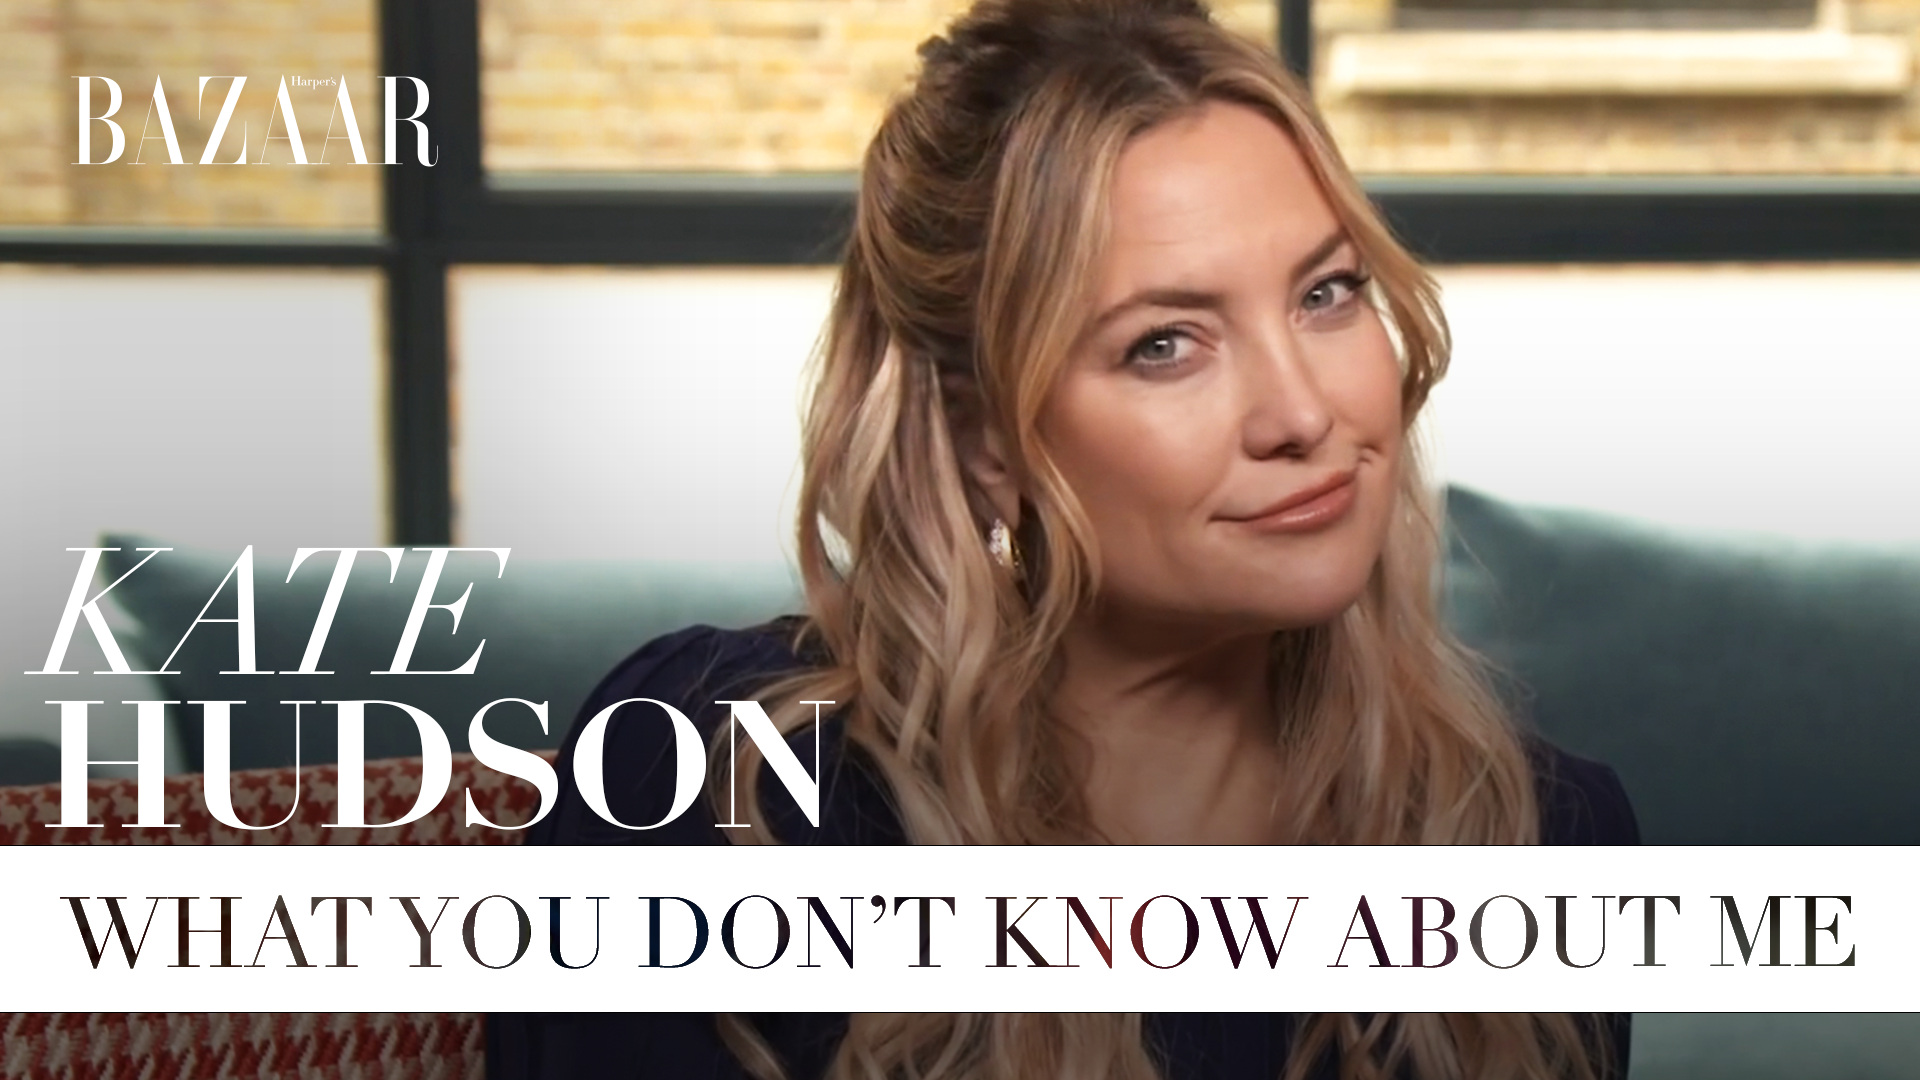 Kate Hudson video interview: What you don't know about me